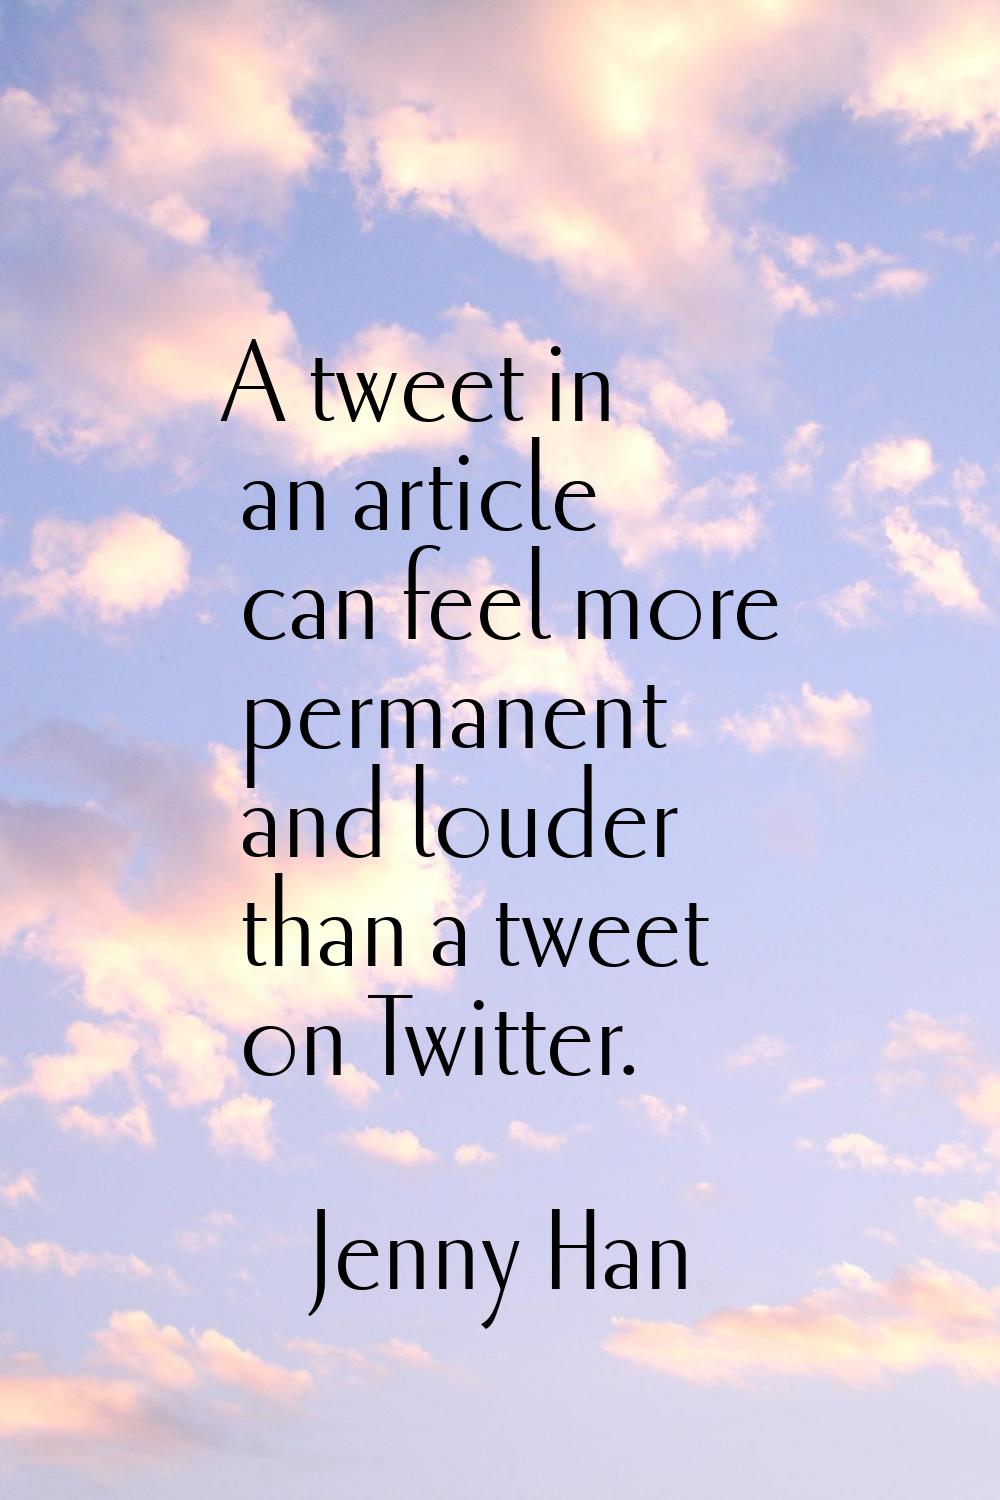 A tweet in an article can feel more permanent and louder than a tweet on Twitter.